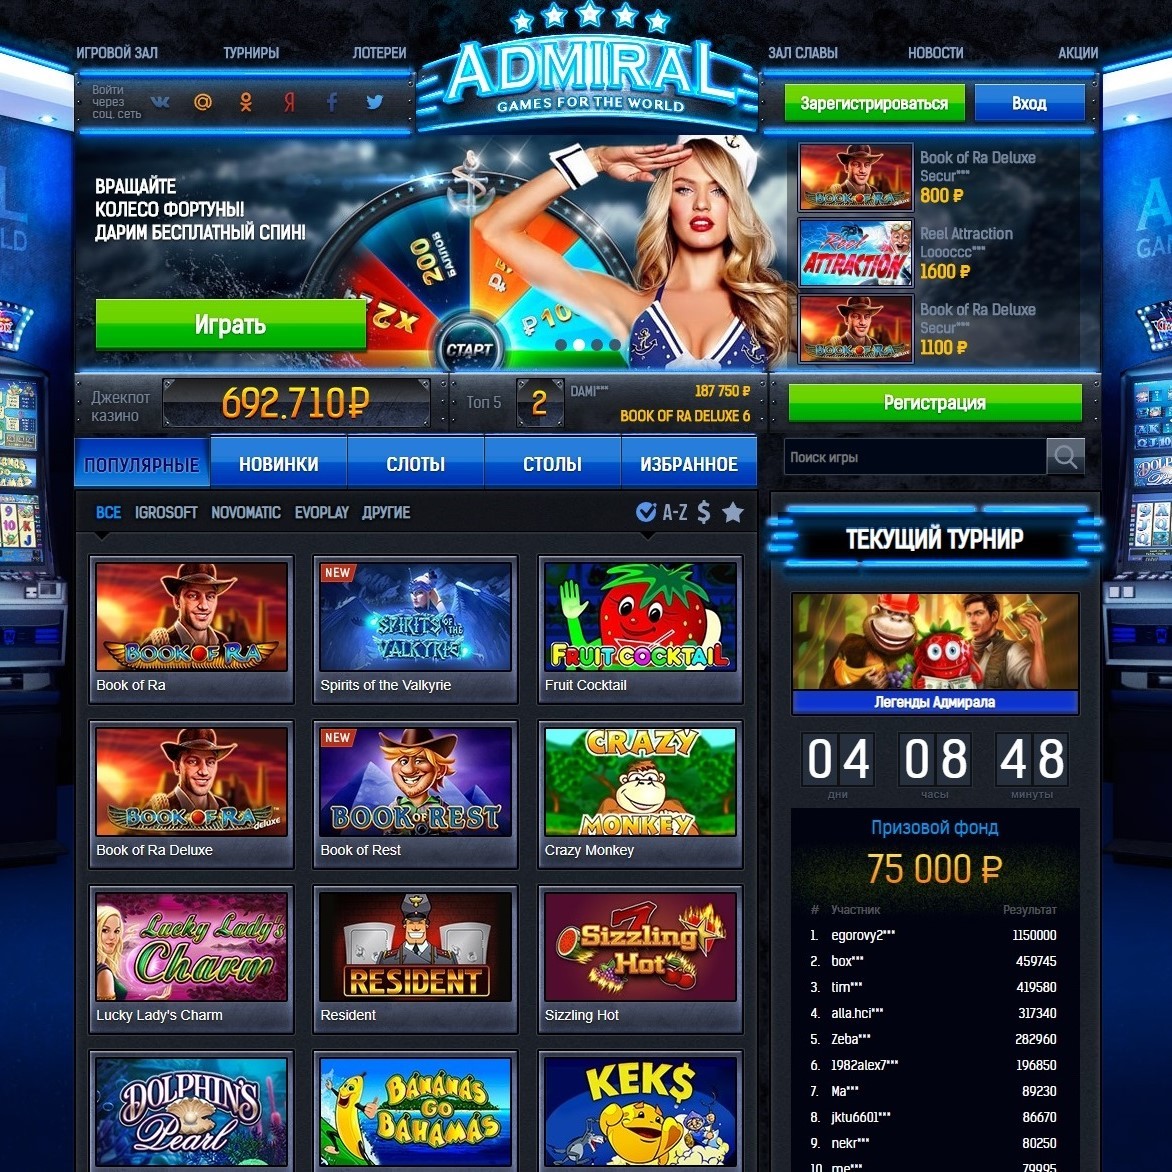 Ags slot machines